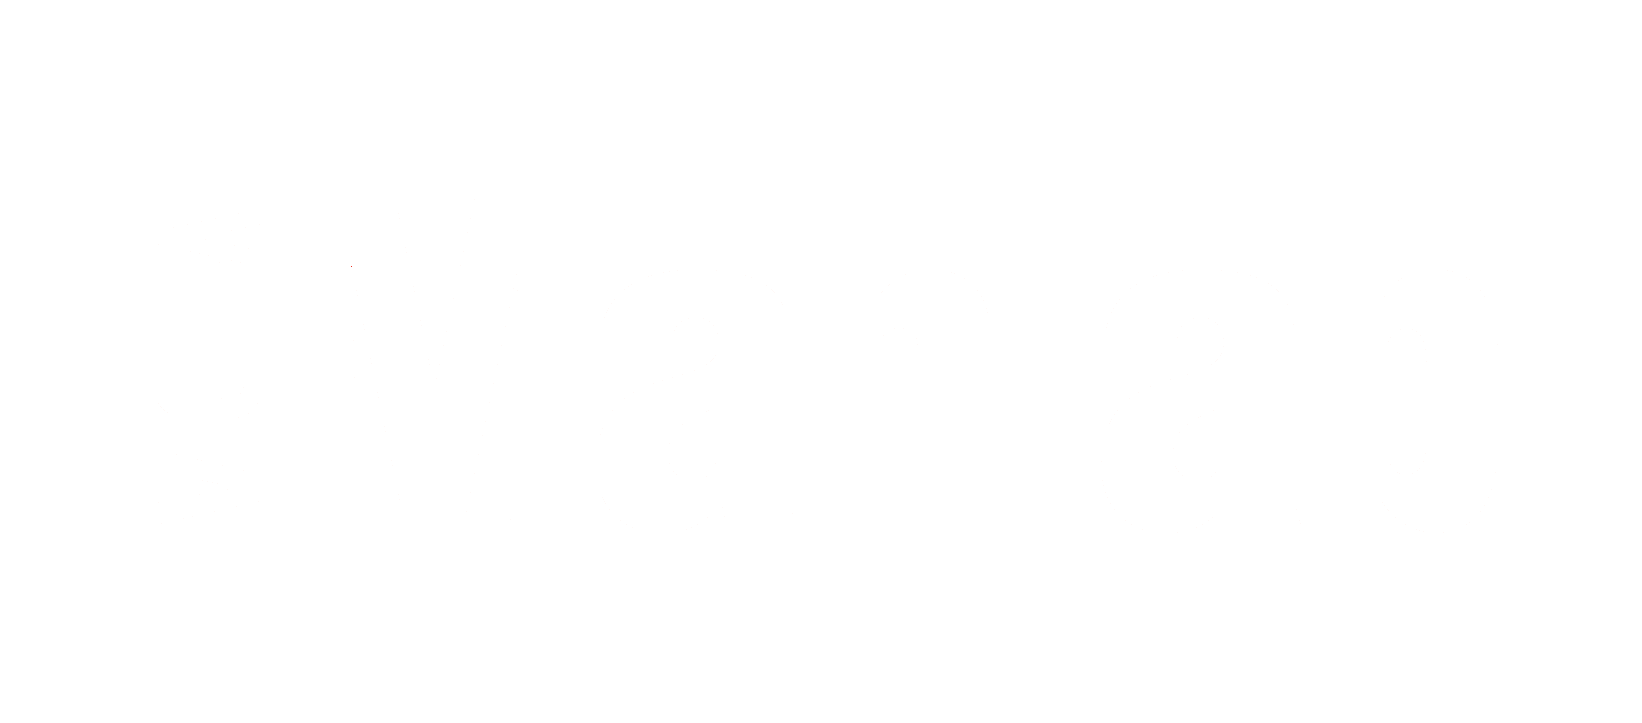 Mahlab-Inverse.png